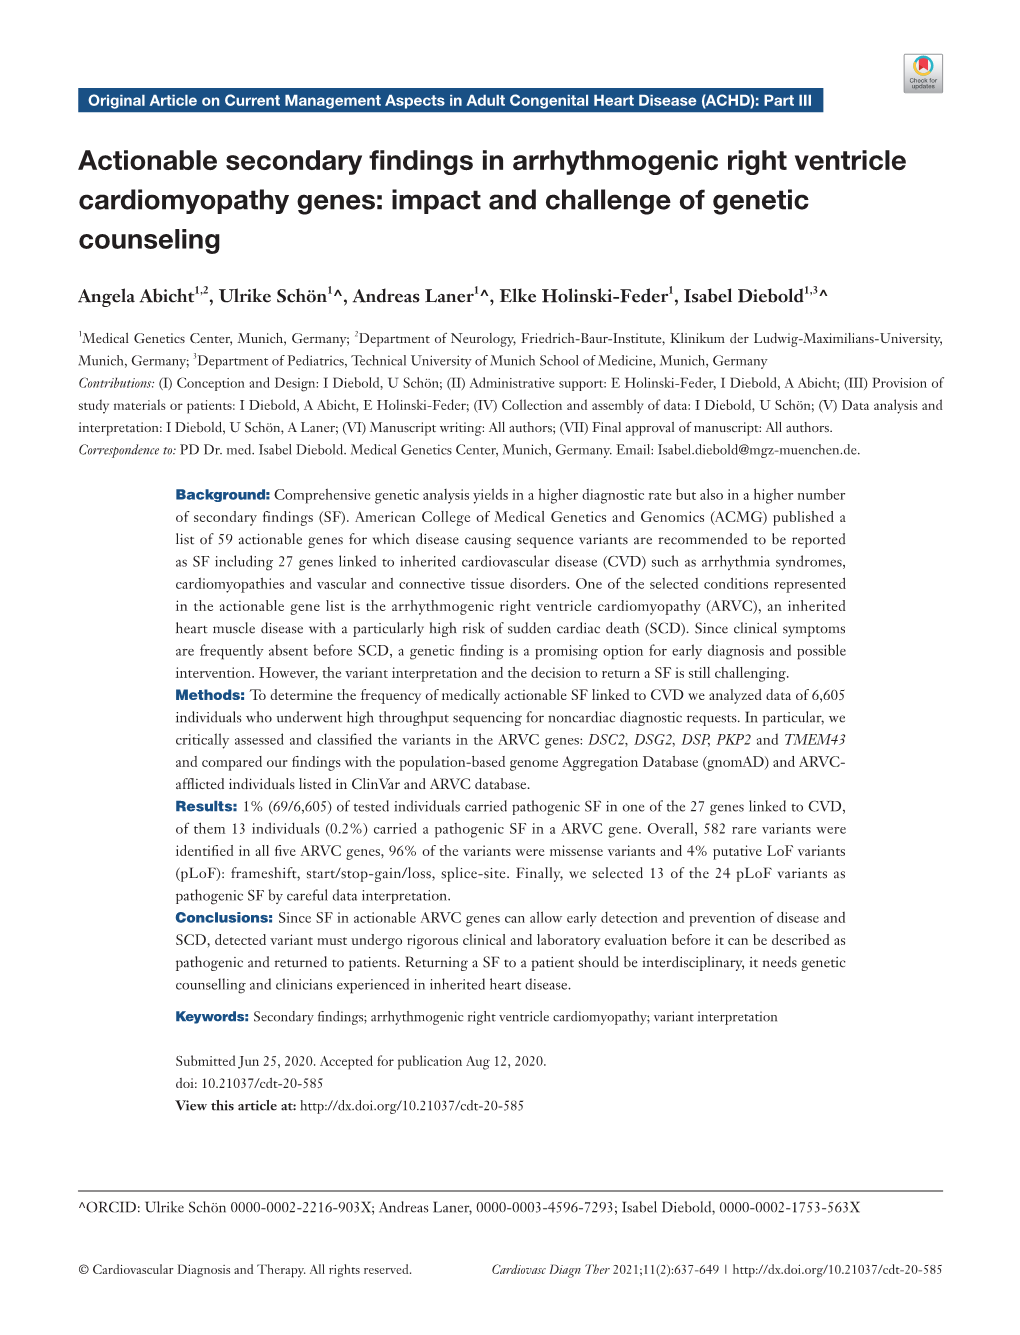 Actionable Secondary Findings in Arrhythmogenic Right Ventricle Cardiomyopathy Genes: Impact and Challenge of Genetic Counseling